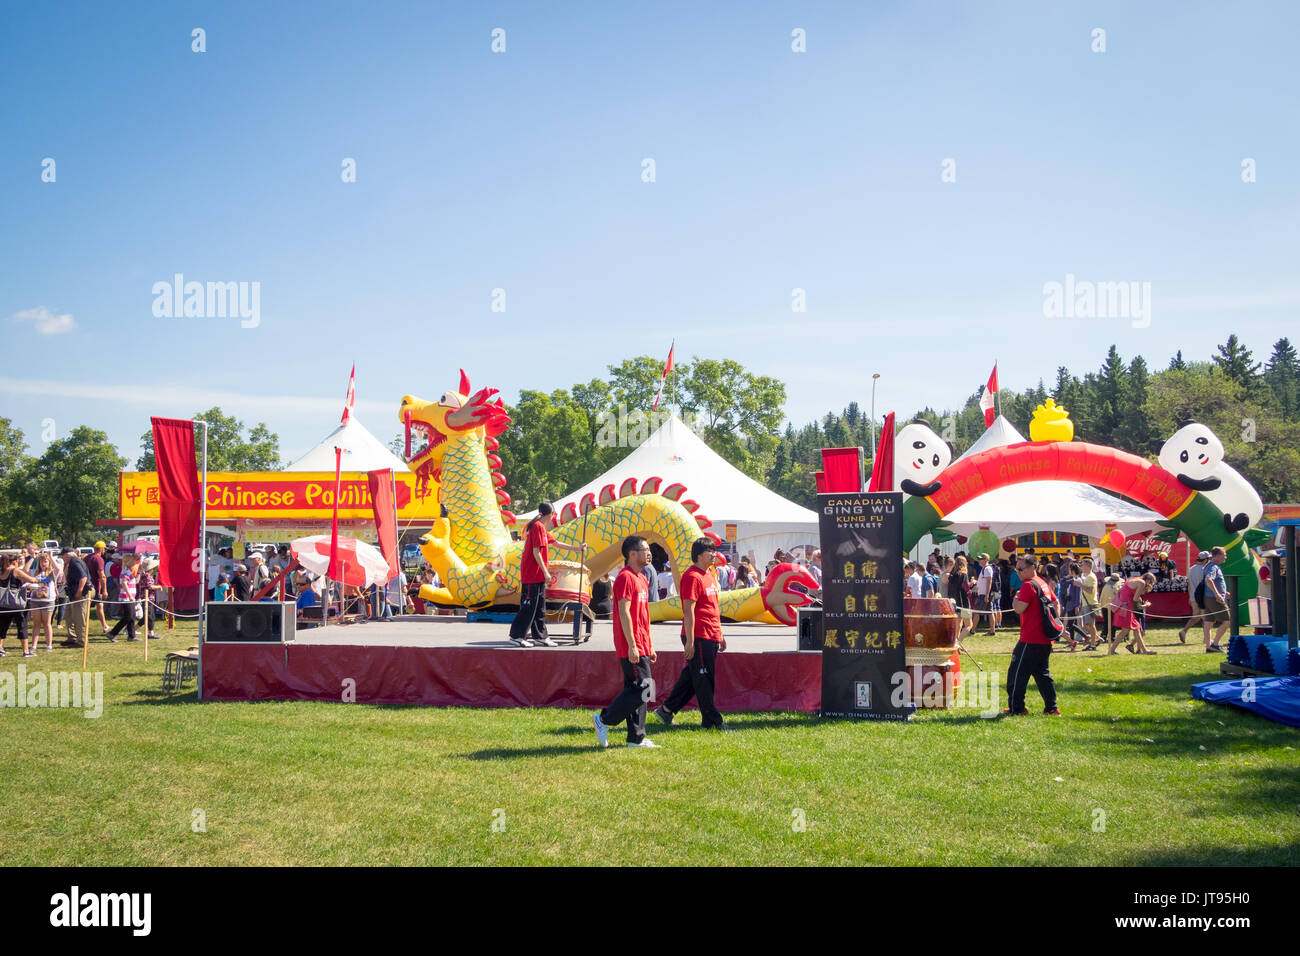 A view of the Chinese Pavilion from the 2017 Heritage Festival, a popular multicultural festival held each summer in Edmonton, Alberta, Canada. Stock Photo